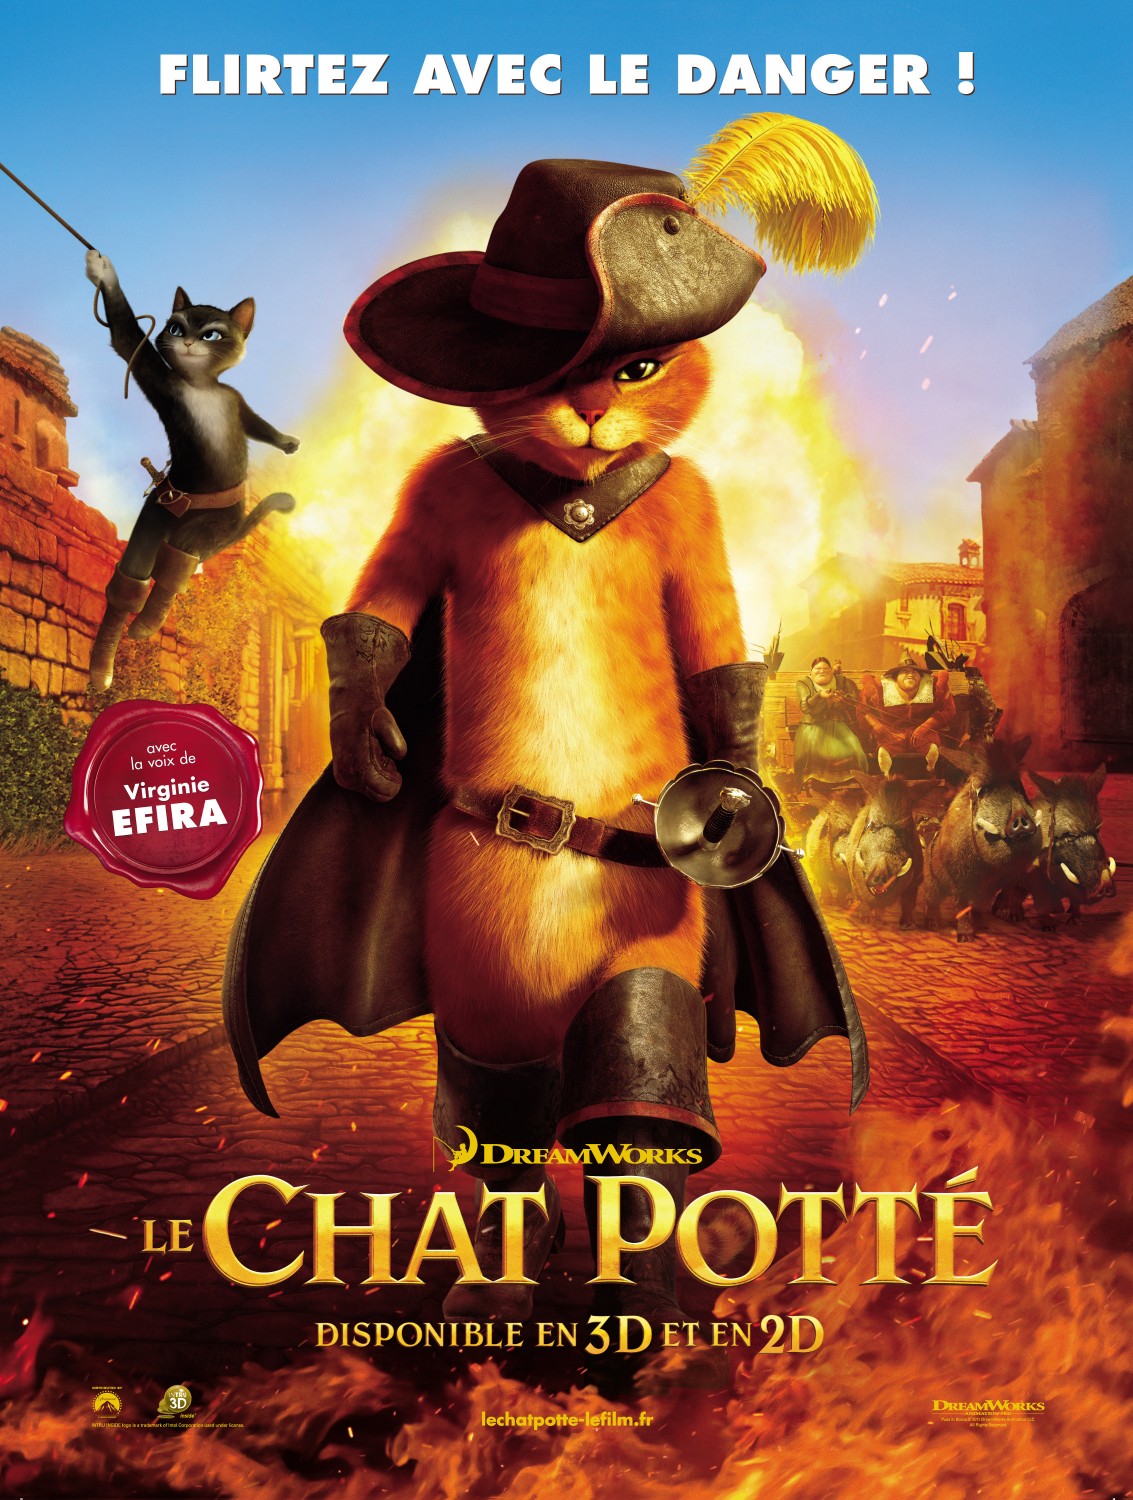 Puss in Boots (2011)